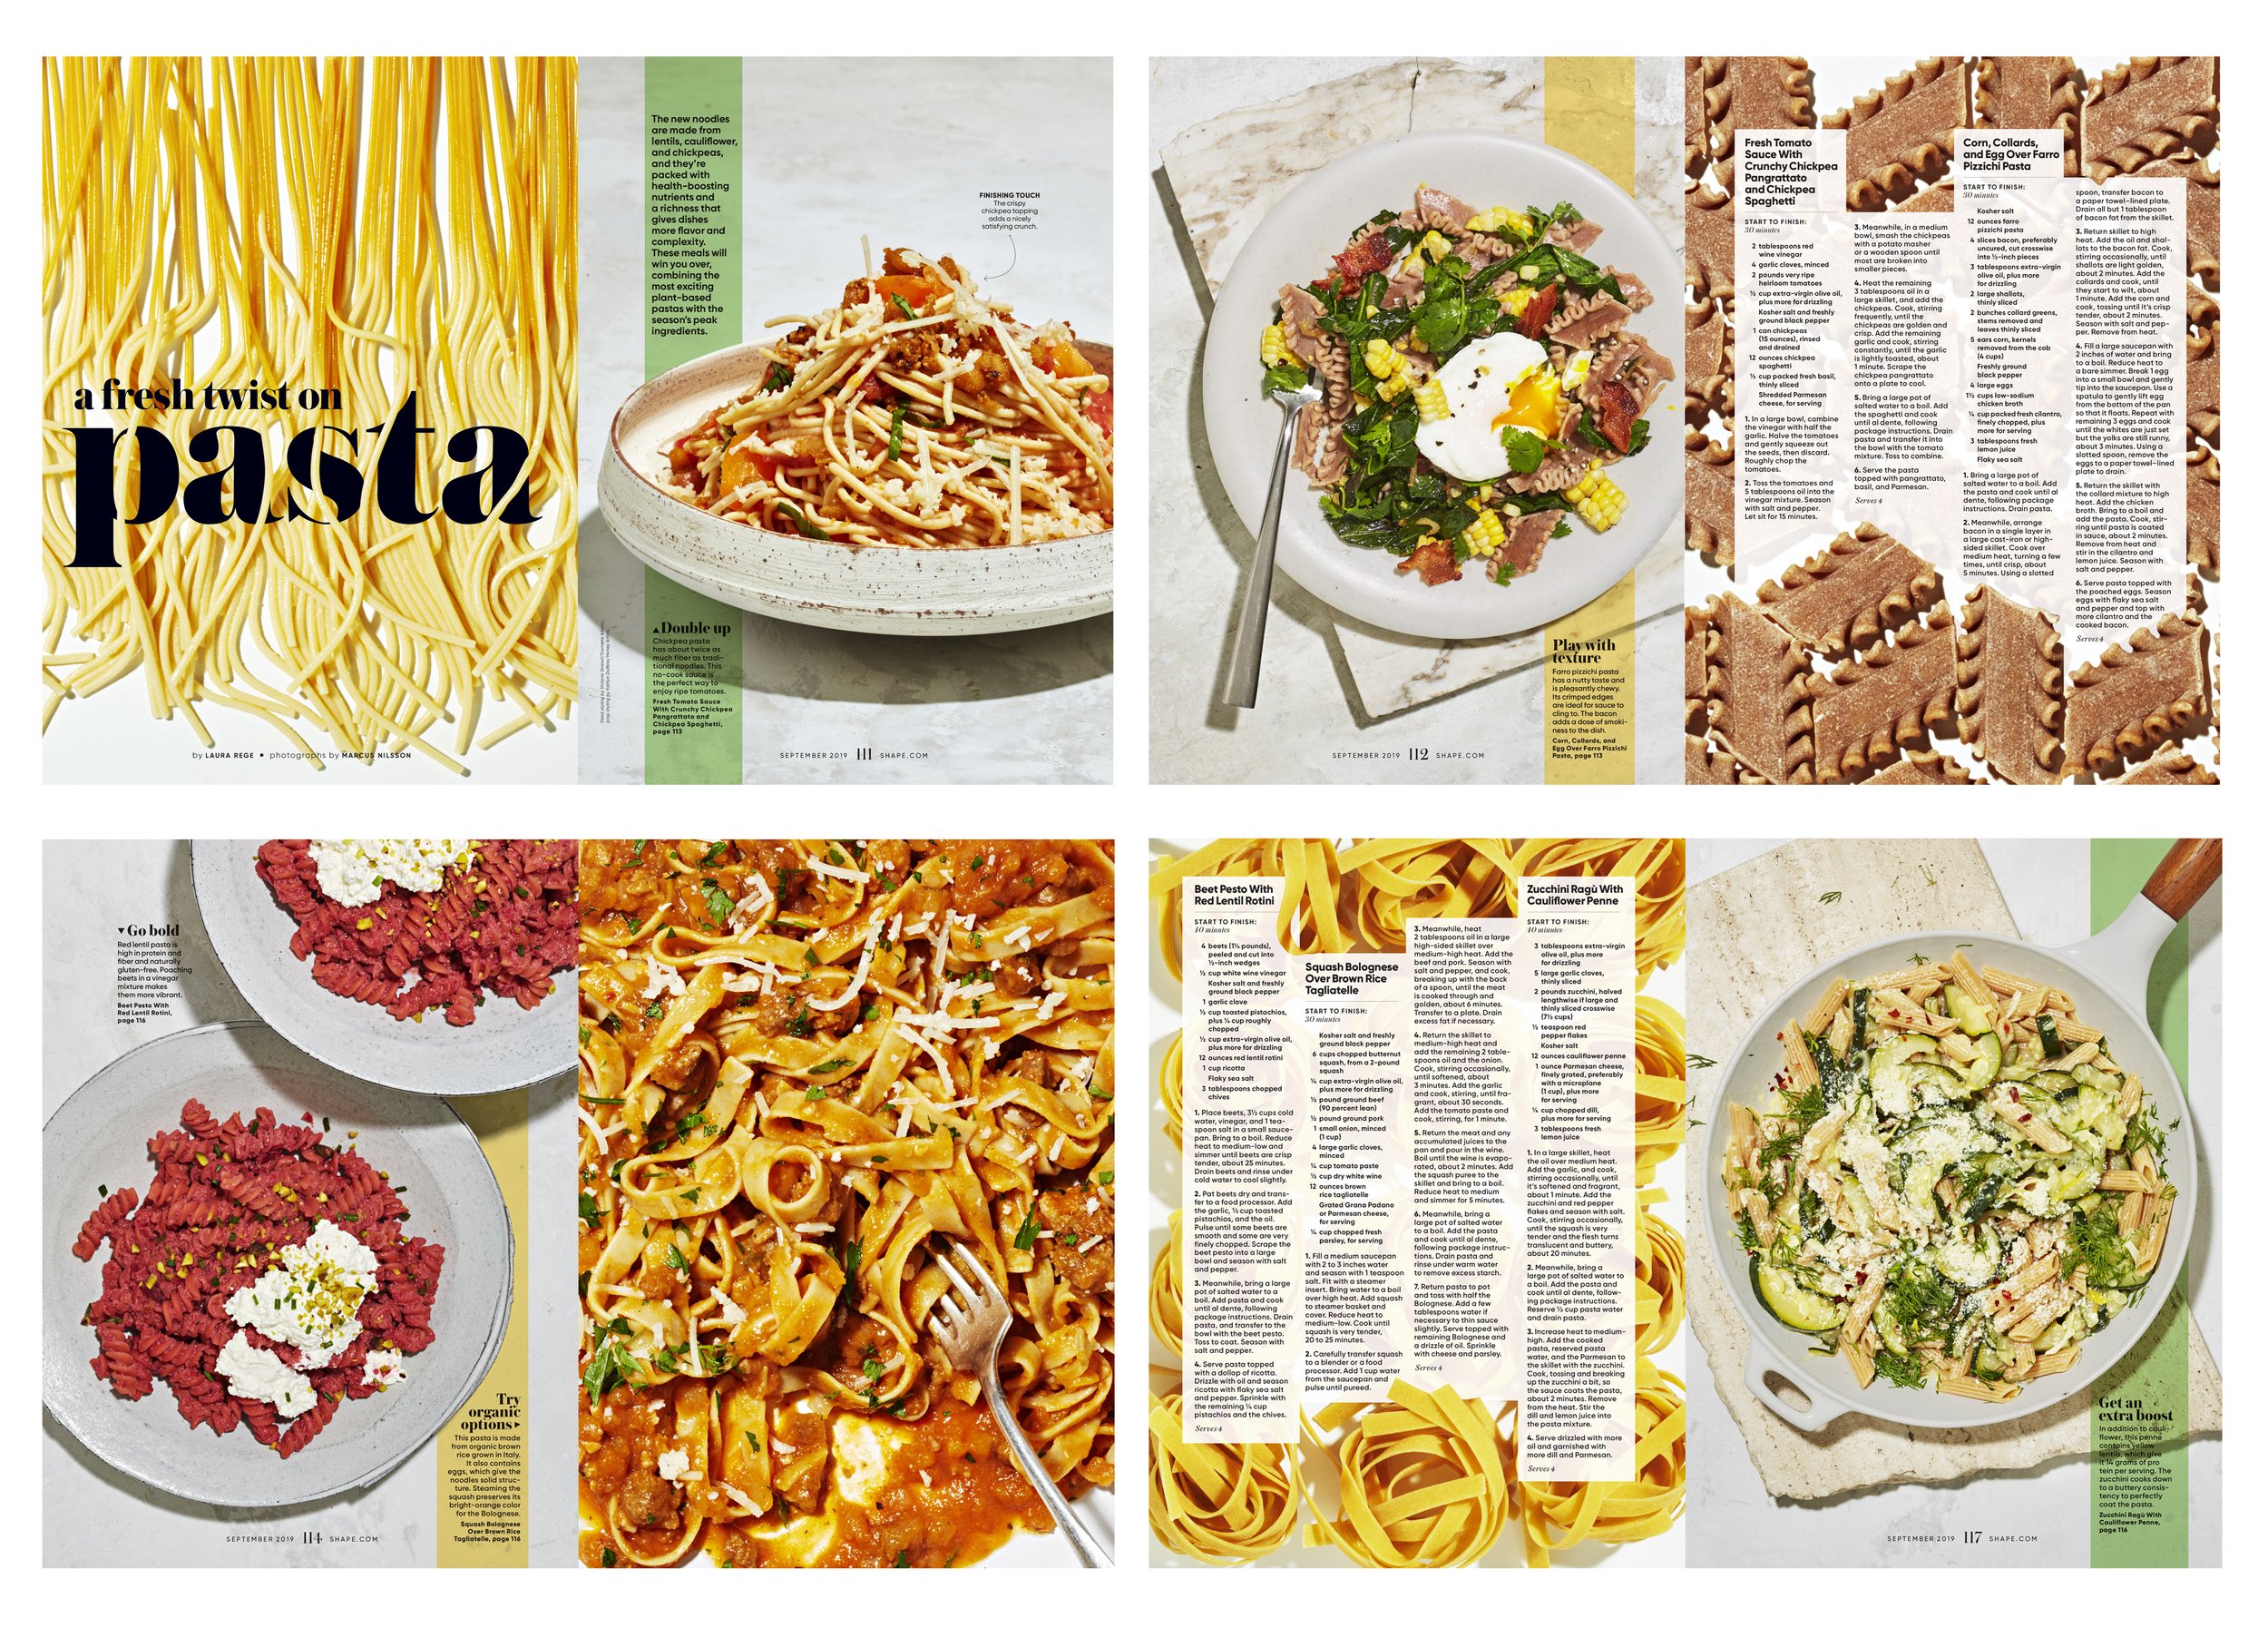 Final Photos and Layout: Food Feature- A Fresh Twist On Pasta